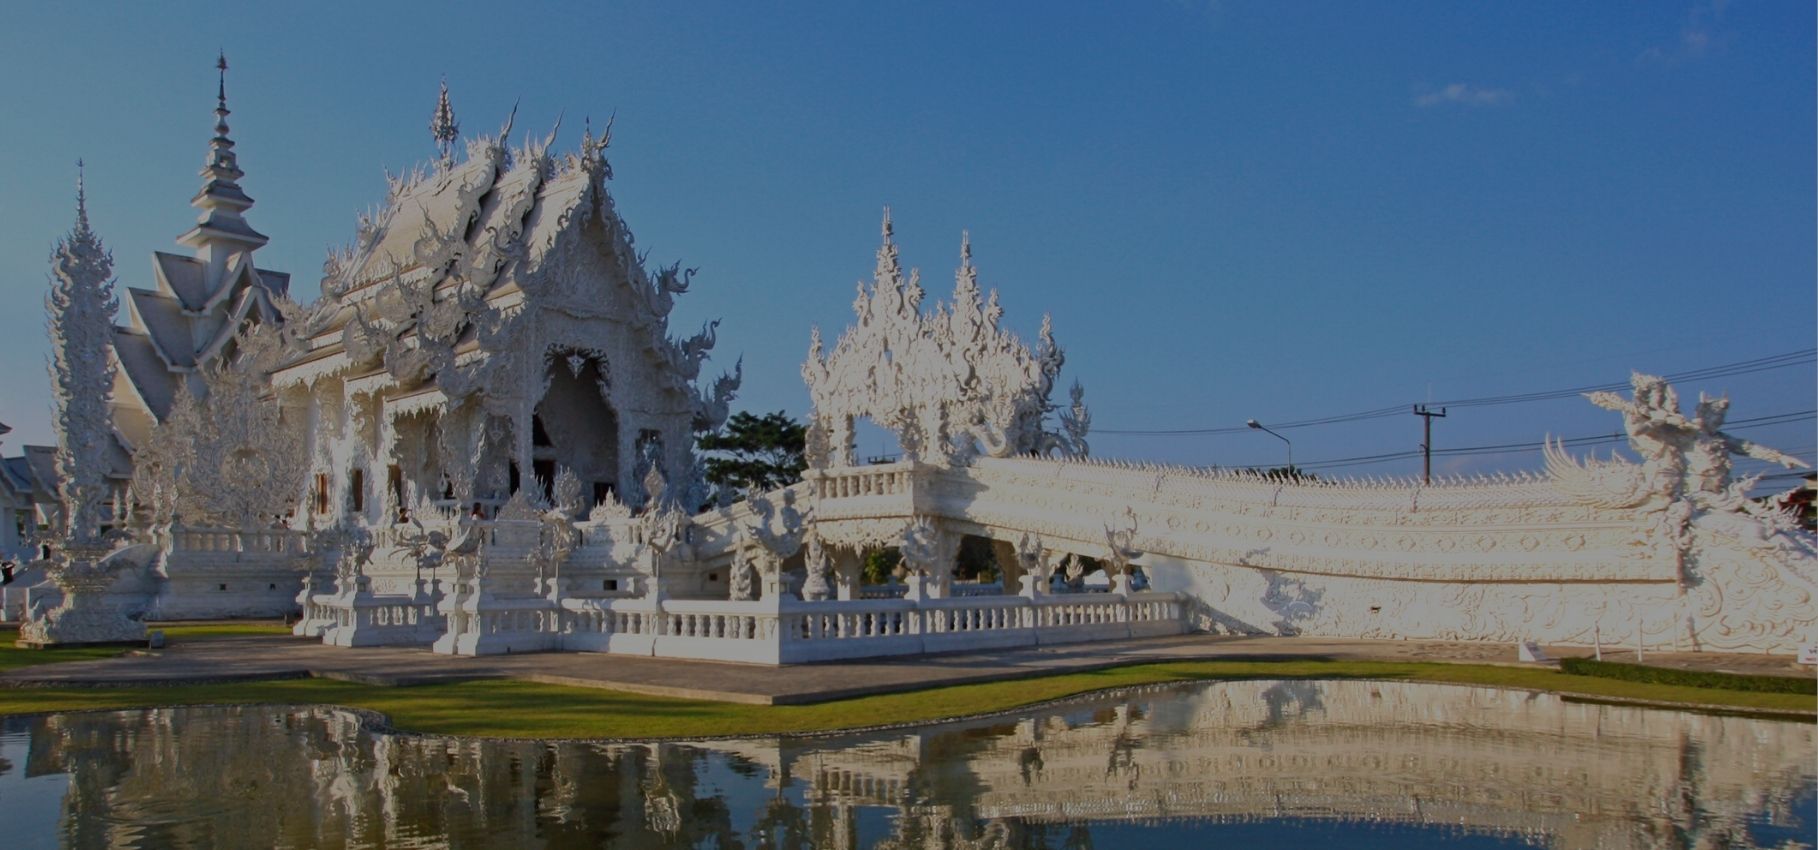 8 places in Chiang Rai you must not miss